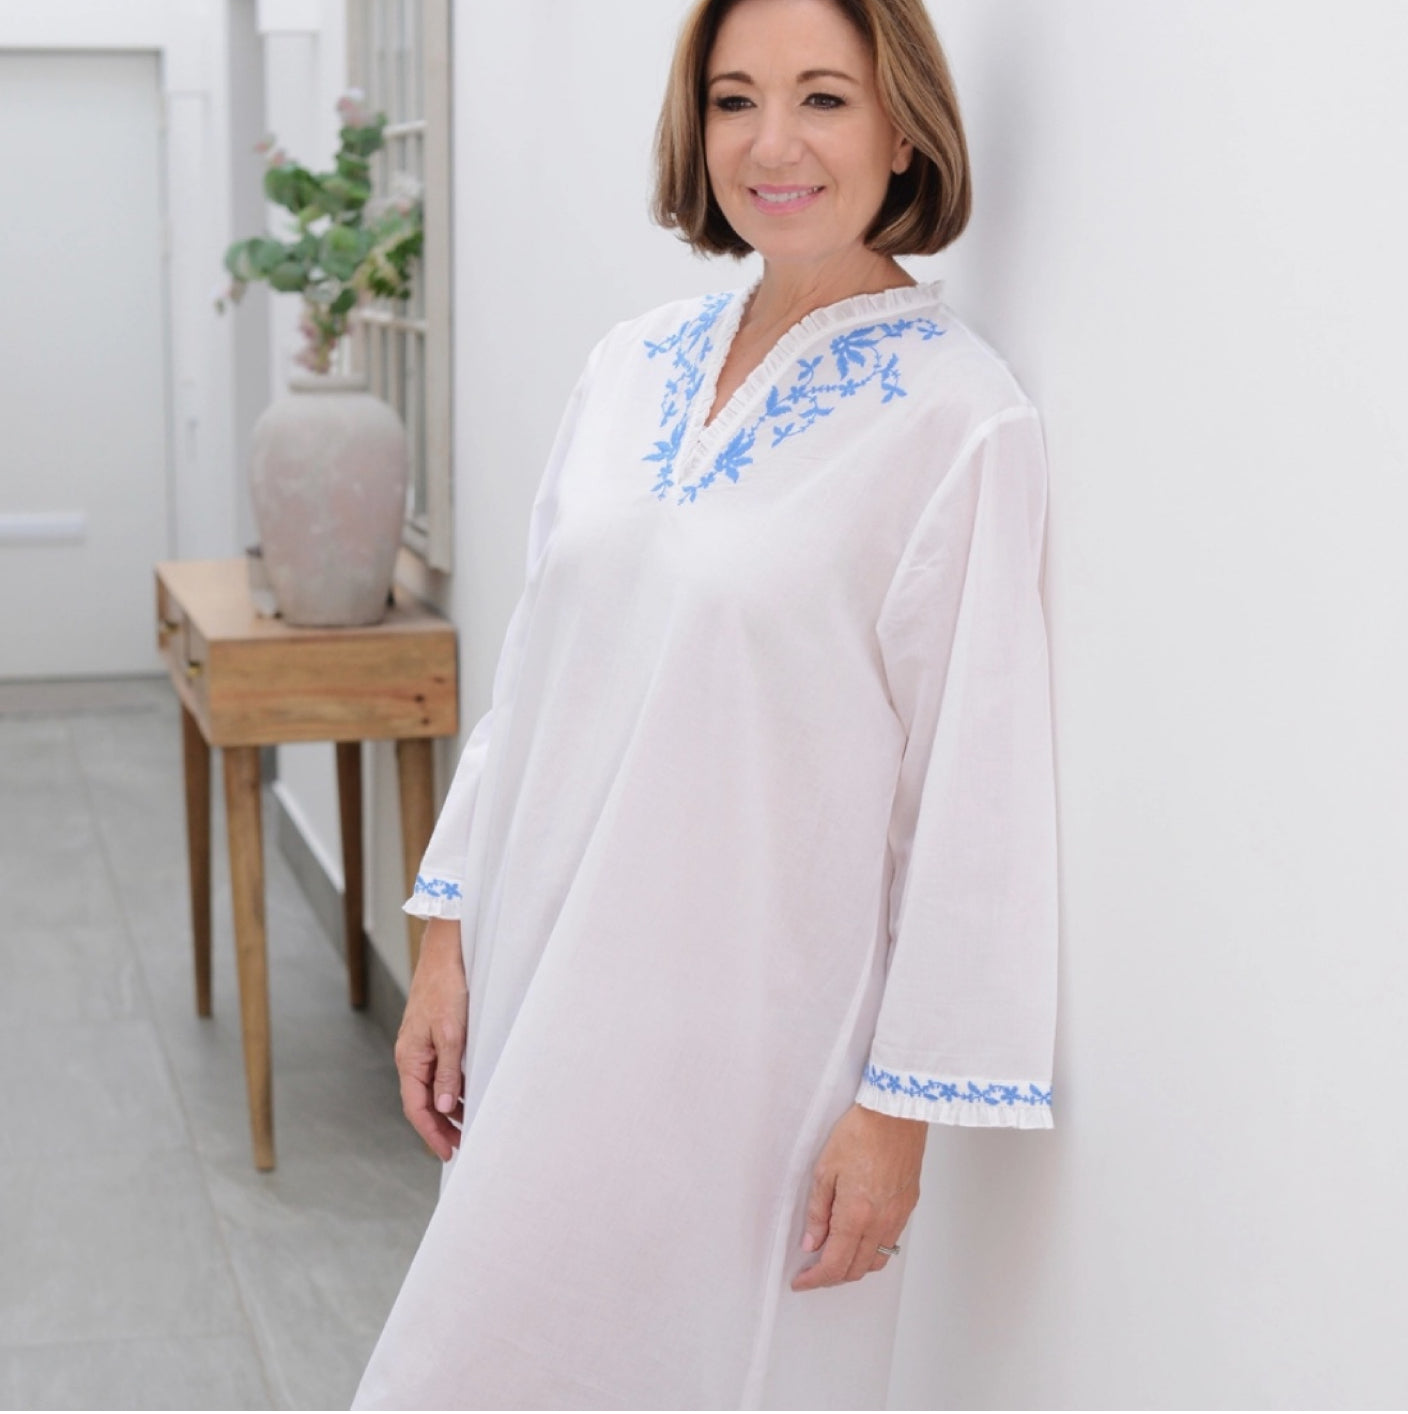 Long Sleeved 100% Cotton Nightdress with Blue Embroidery